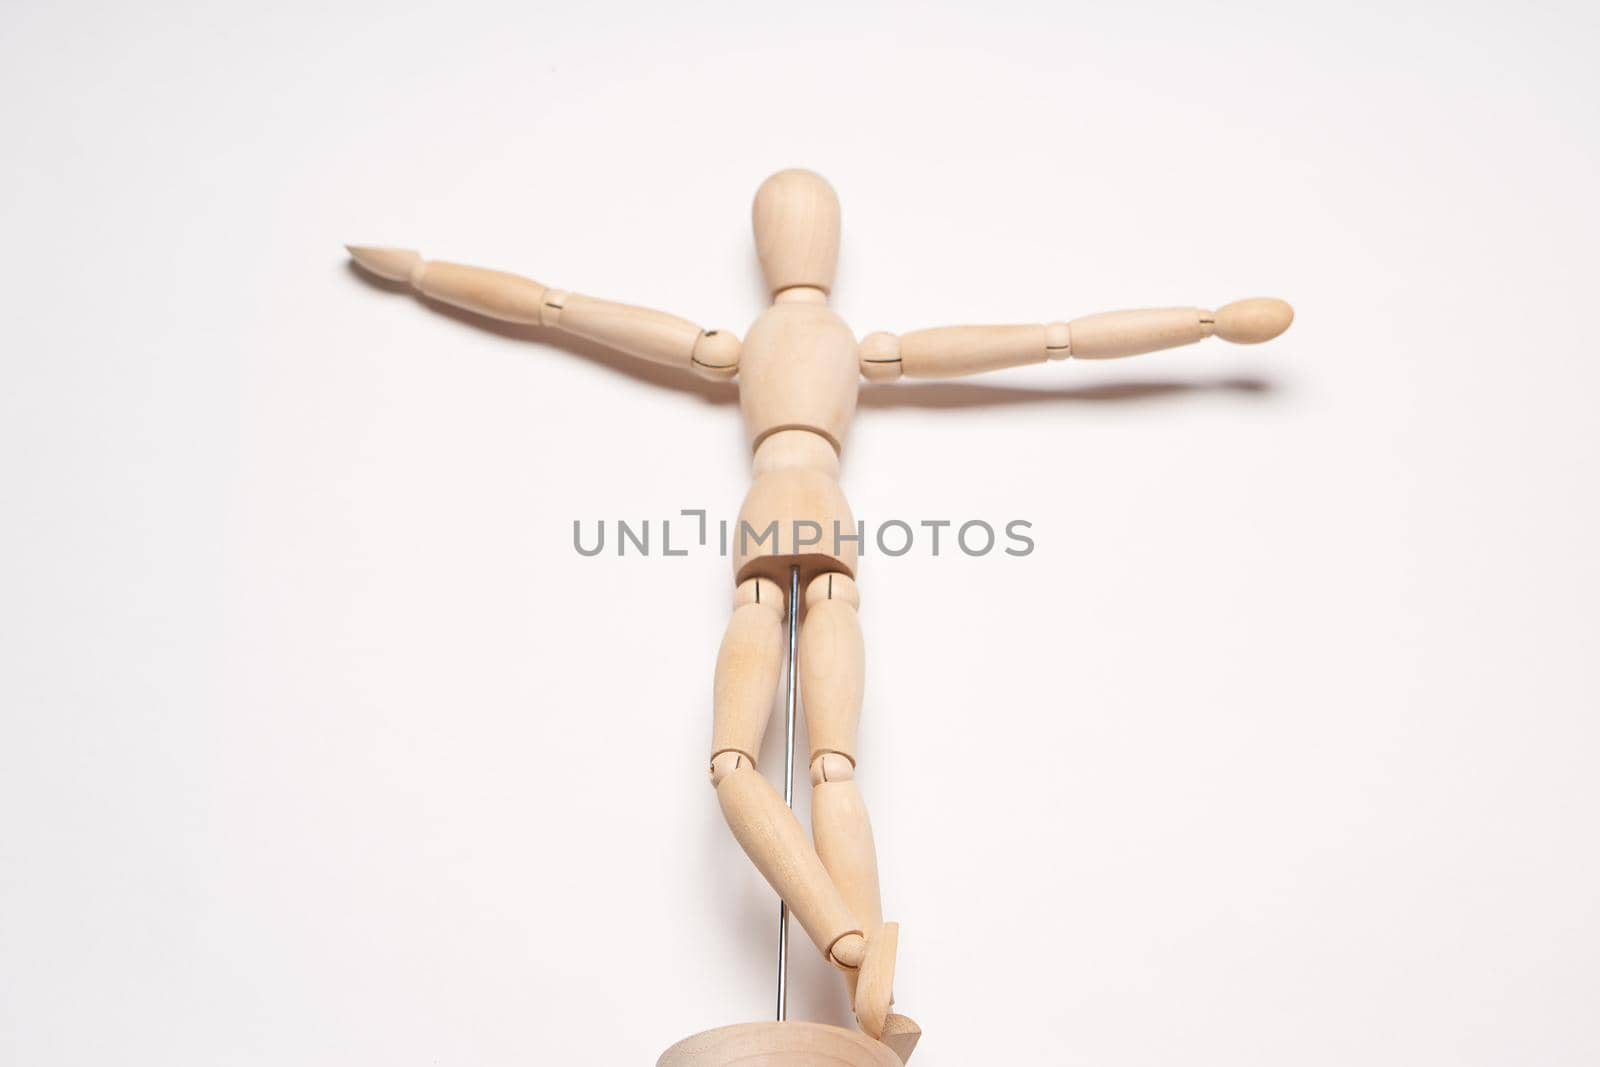 design wooden mannequin object toy posing light background by Vichizh